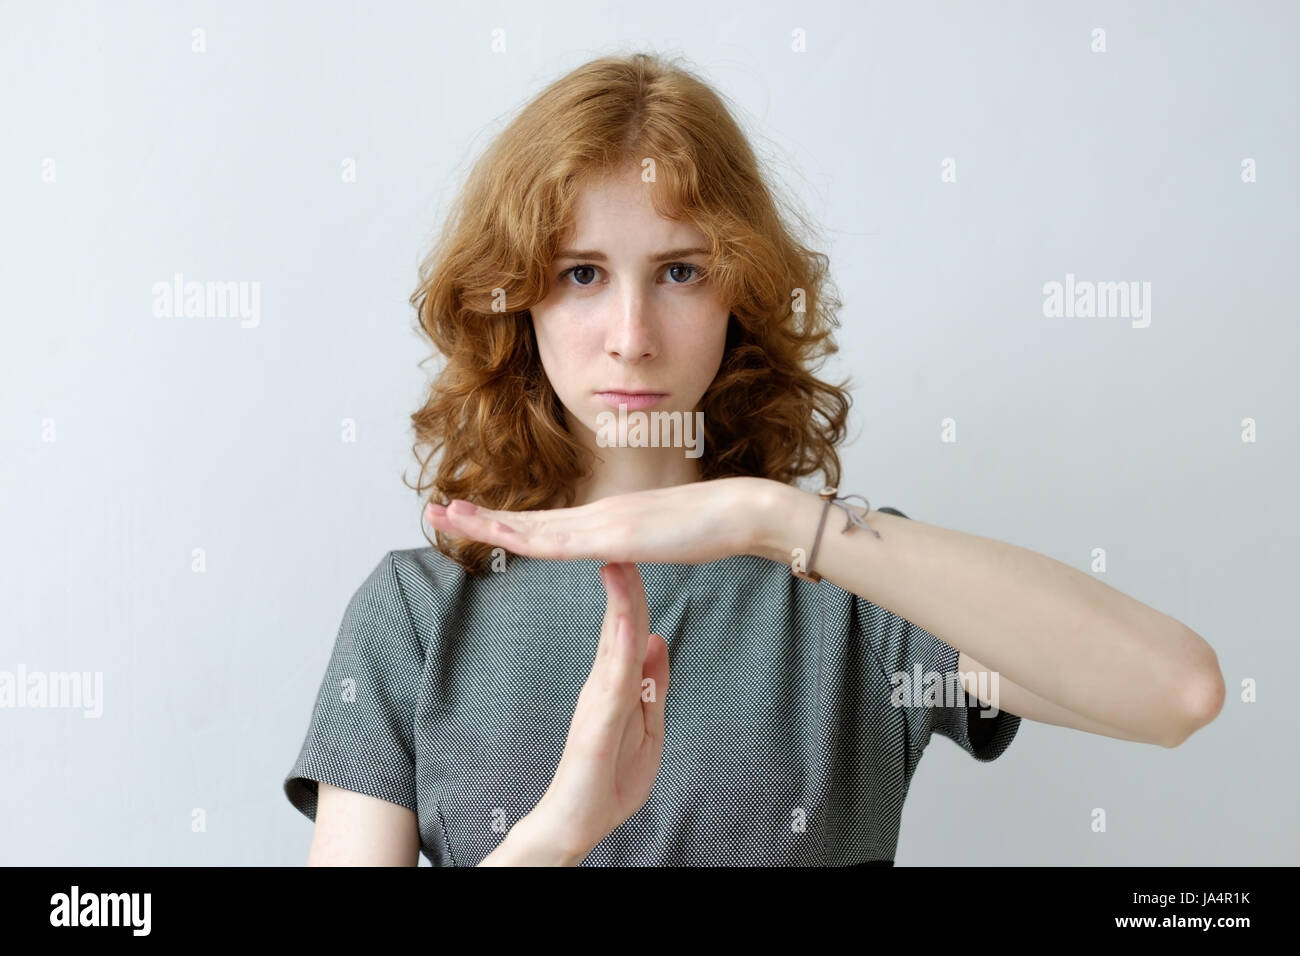 A red-haired girl with curly hair and freckles shows a sign of a timeout. Pause in work or relationship Stock Photo